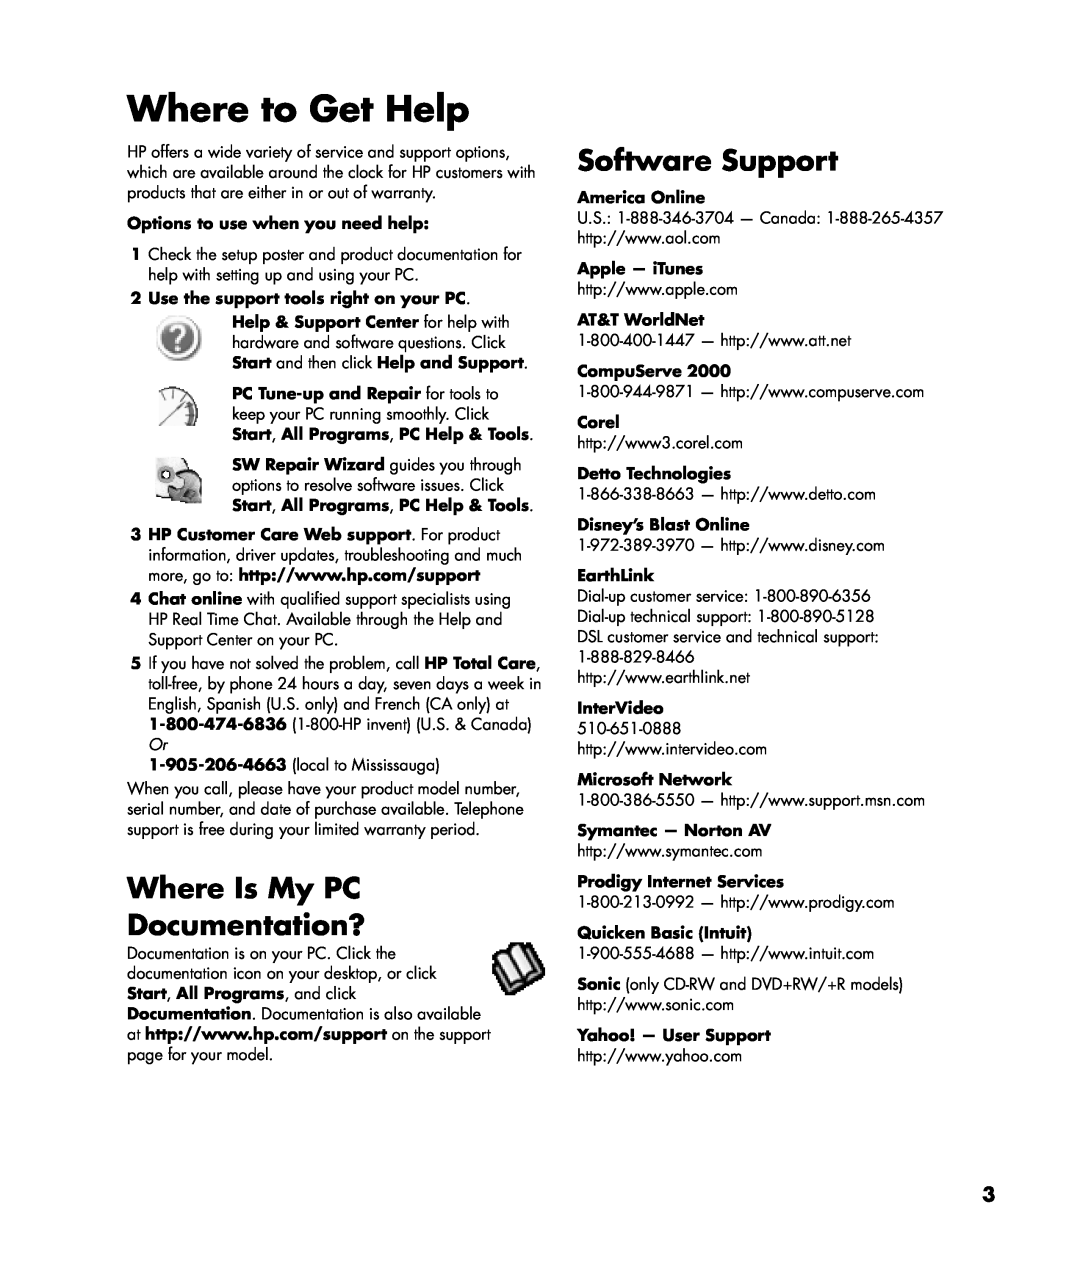 HP a1007w Where to Get Help, Where Is My PC Documentation?, Software Support, Options to use when you need help, Corel 